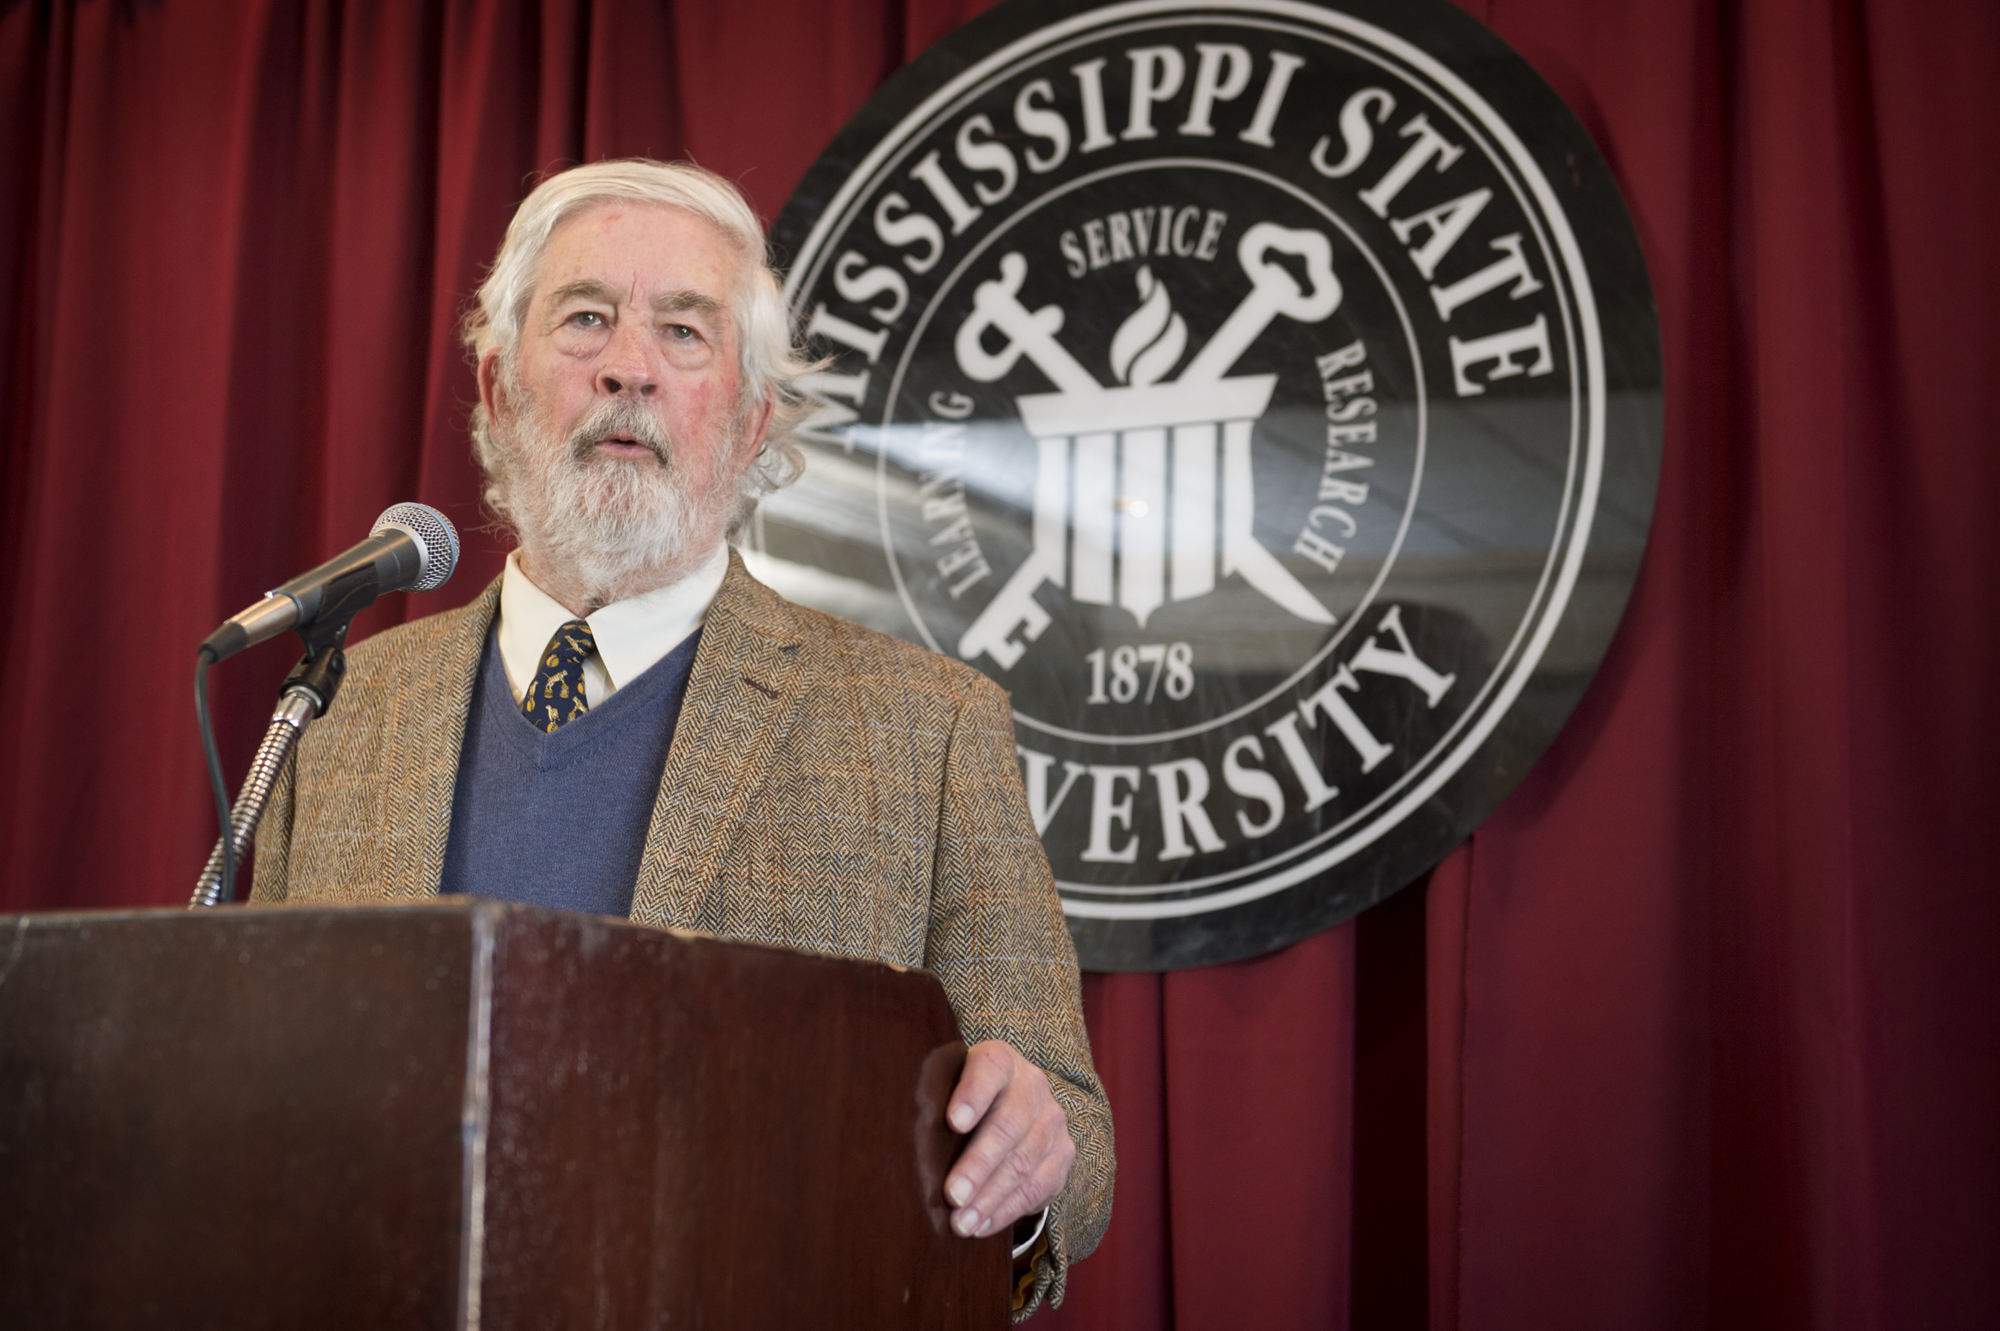 Journalist and author Curtis Wilkie gave the inaugural lecture for MSU's Lamar Conerly Governance Forum Nov. 17.